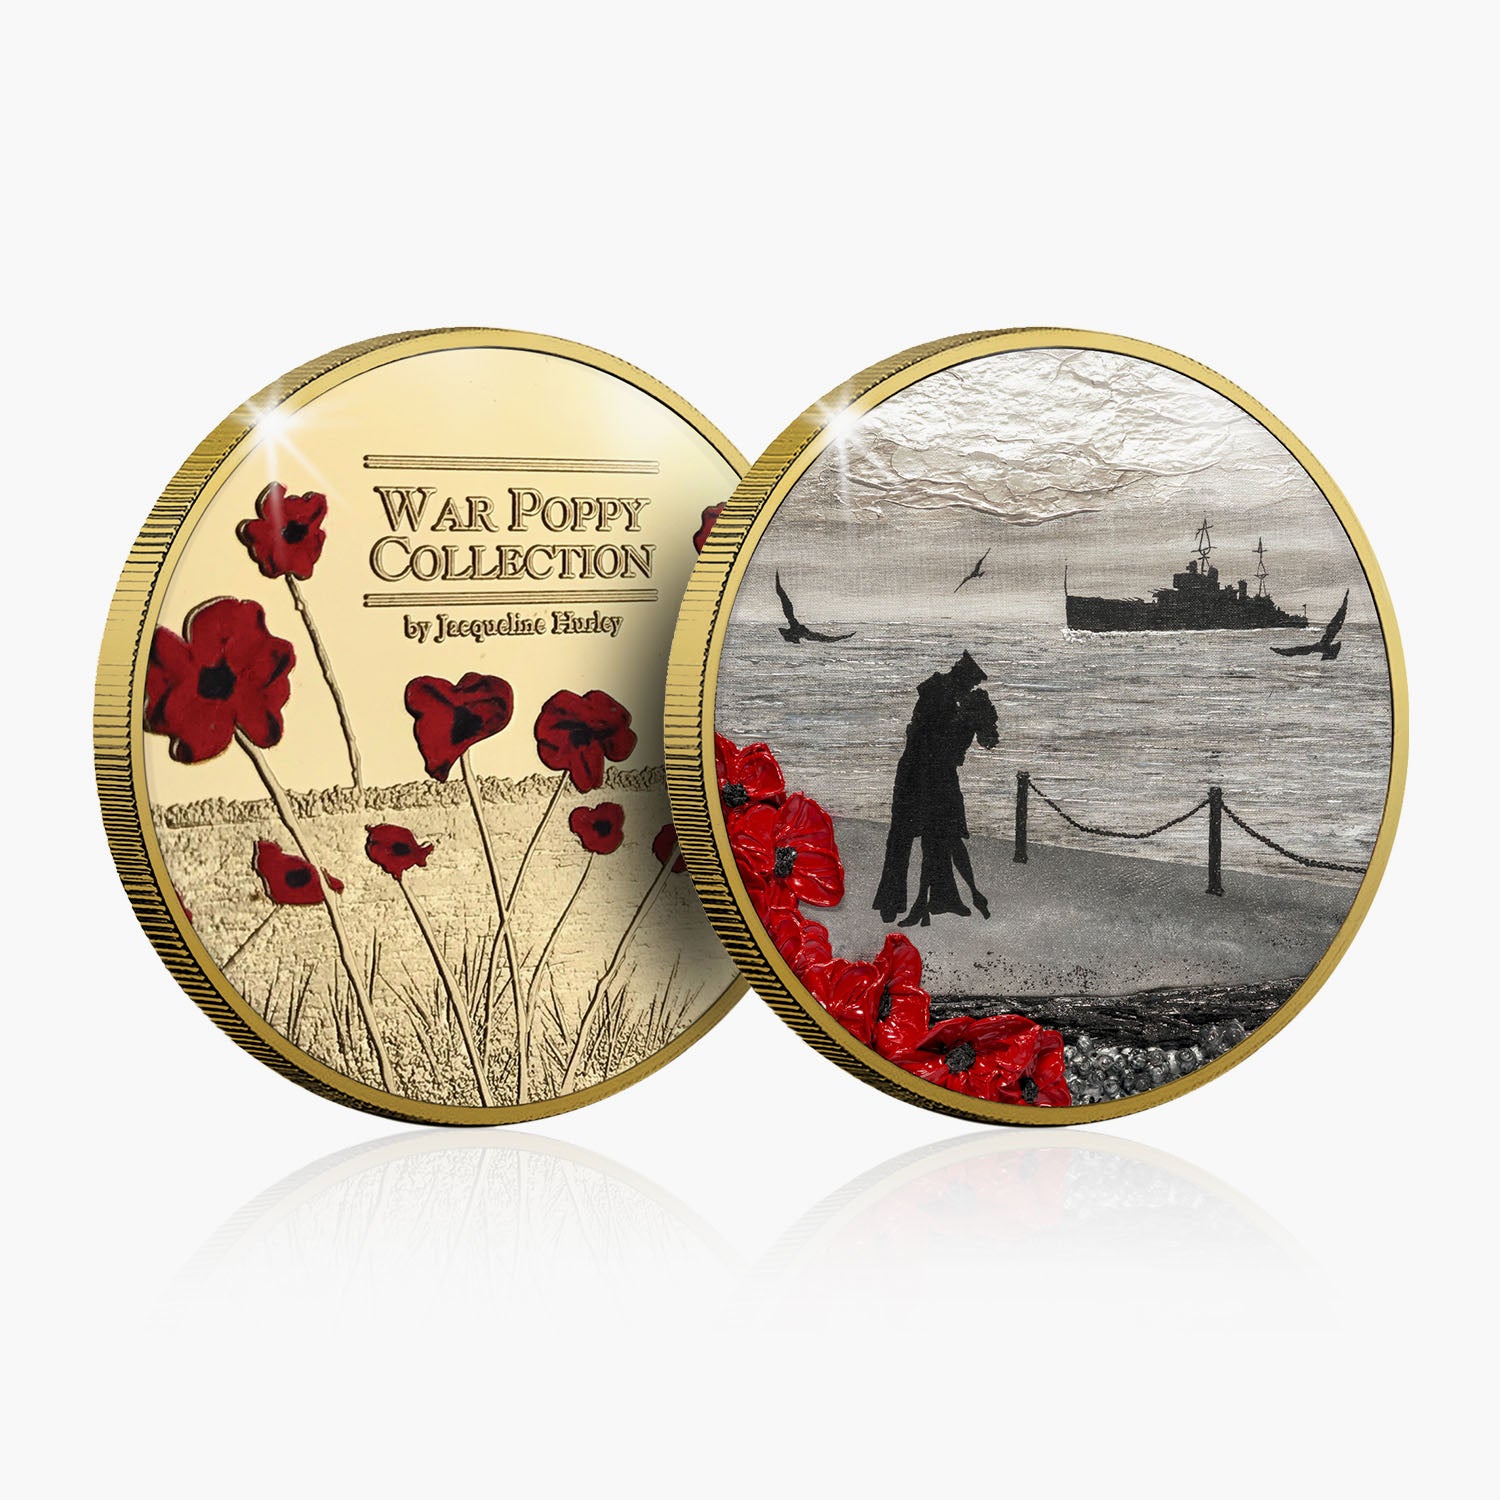 A Kiss to Last Forever Gold-Plated Commemorative